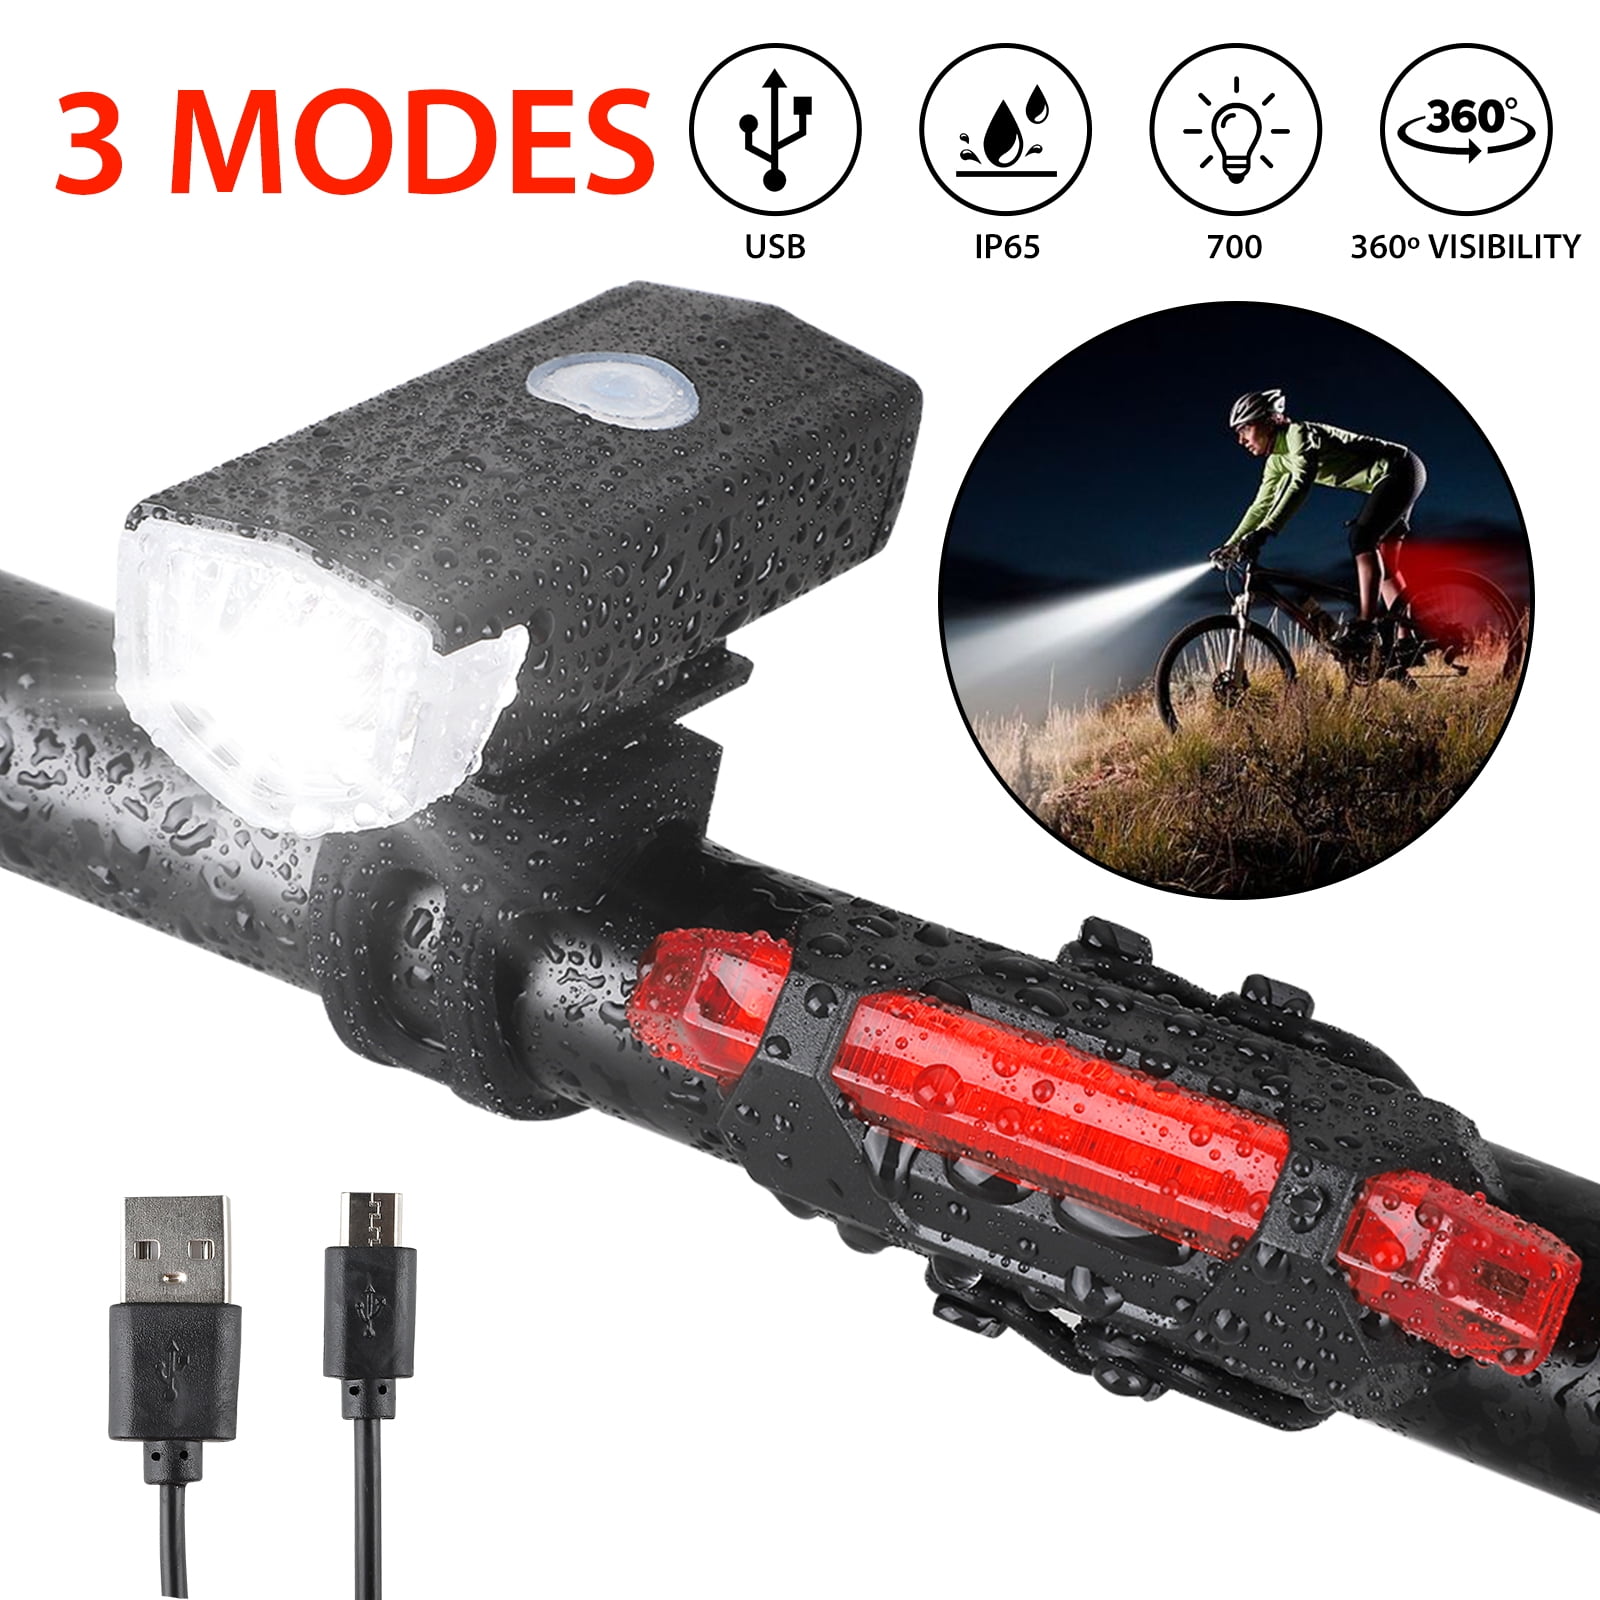 USB Rechargeable LED Bike Tail Flash Light Rear Lamp 15 Lumen for Cycling Safety 